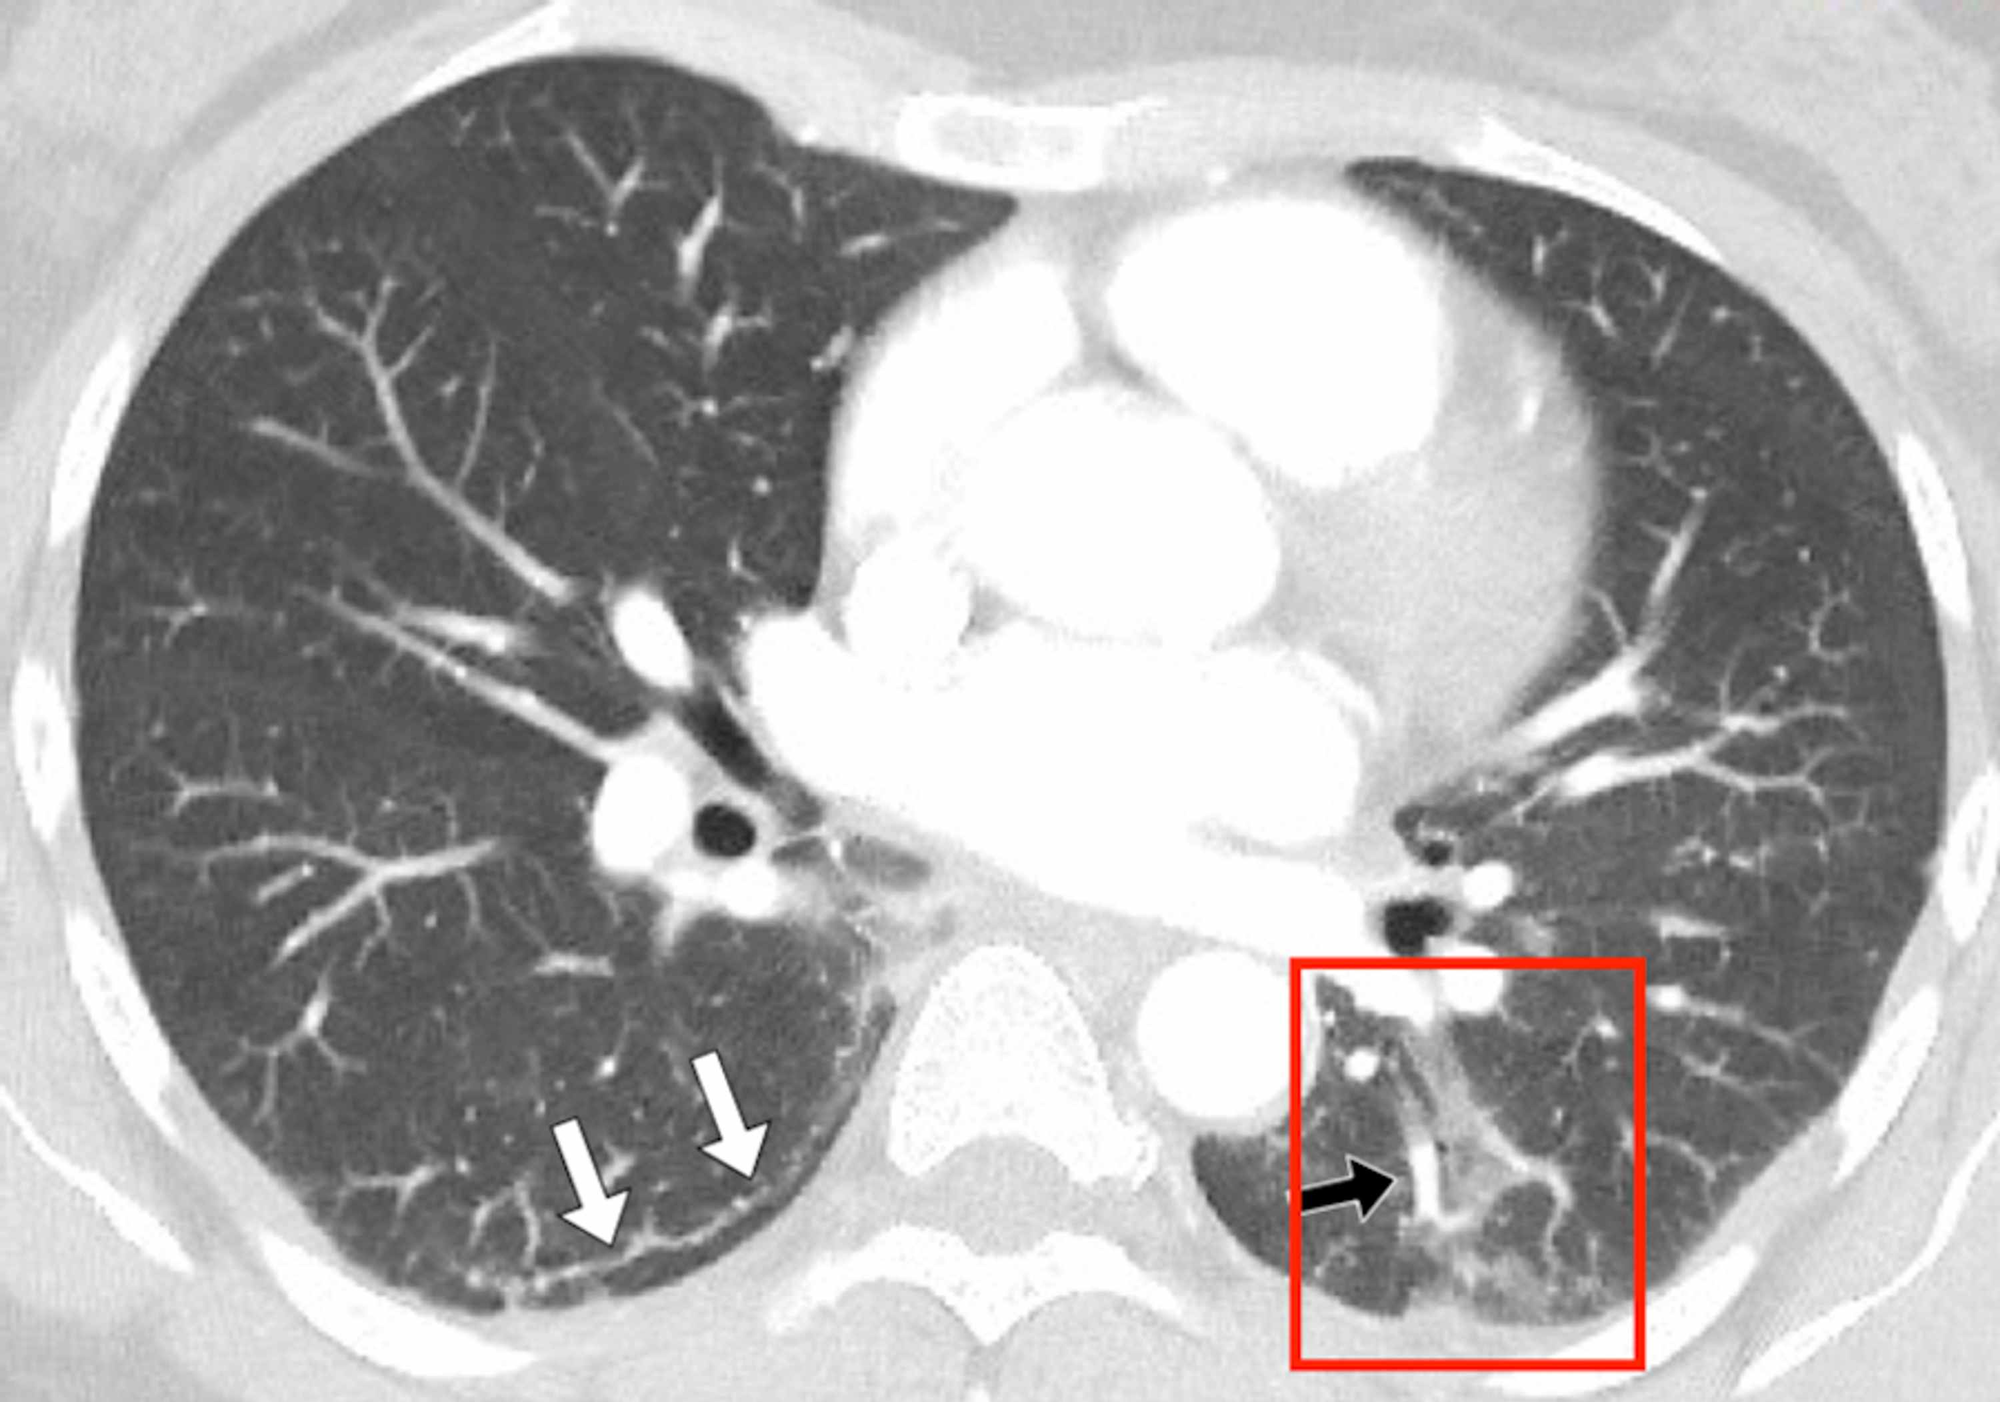 Cureus Positive Chest Ct Features In Patients With Covid 19 Pneumonia And Negative Real Time Polymerase Chain Reaction Test